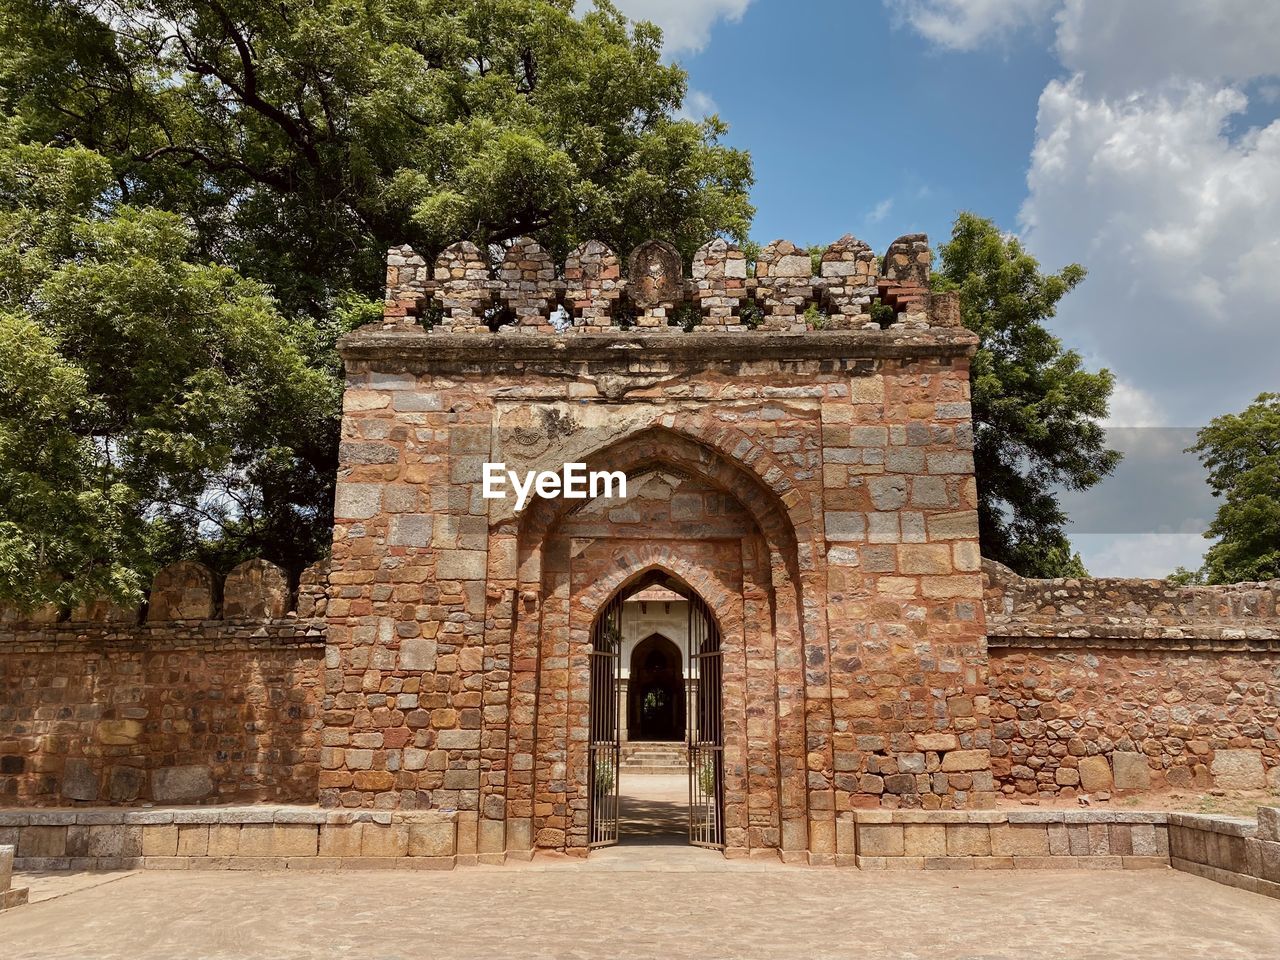 architecture, built structure, history, the past, tree, arch, plant, building exterior, travel destinations, entrance, nature, building, place of worship, ancient history, religion, brick, gate, ruins, ancient, sky, travel, cloud, wall, no people, historic site, outdoors, tourism, door, estate, day, belief, fortification, old